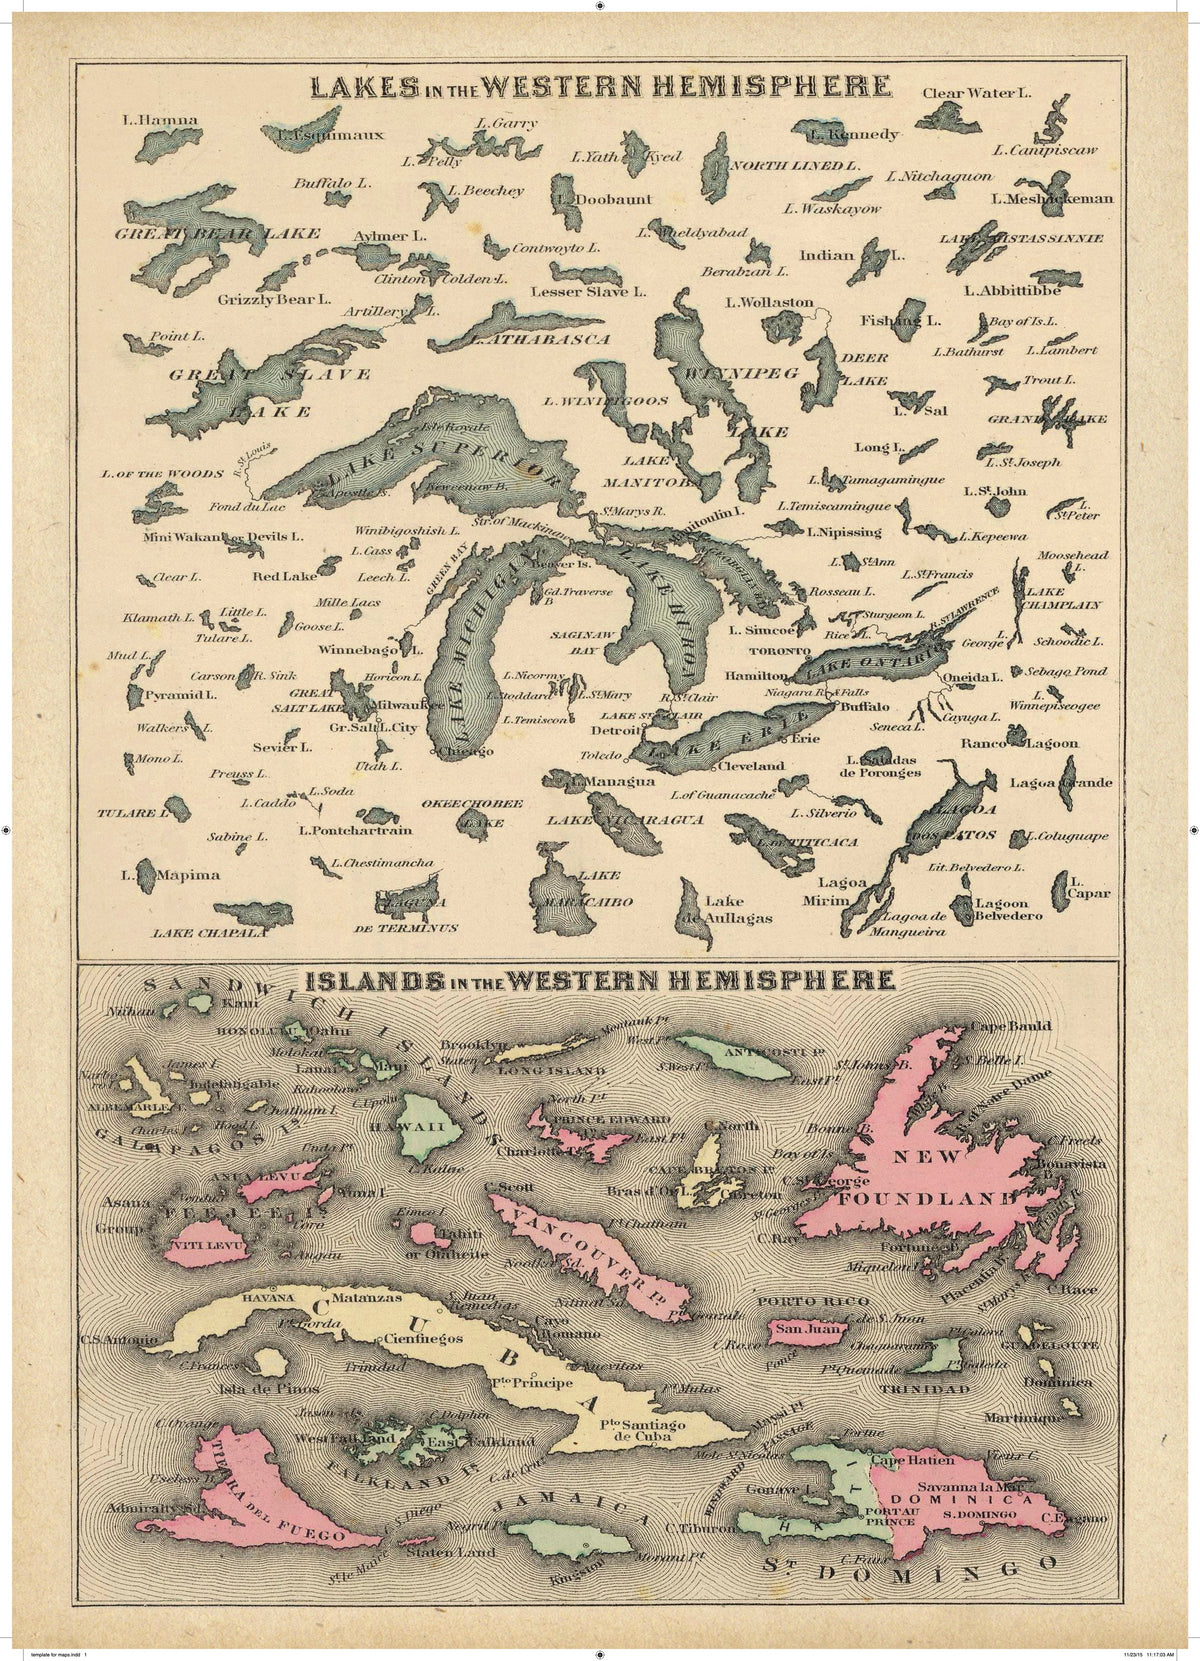 Cartolina Vintage Map - Lakes and Islands in the Western Hemisphere